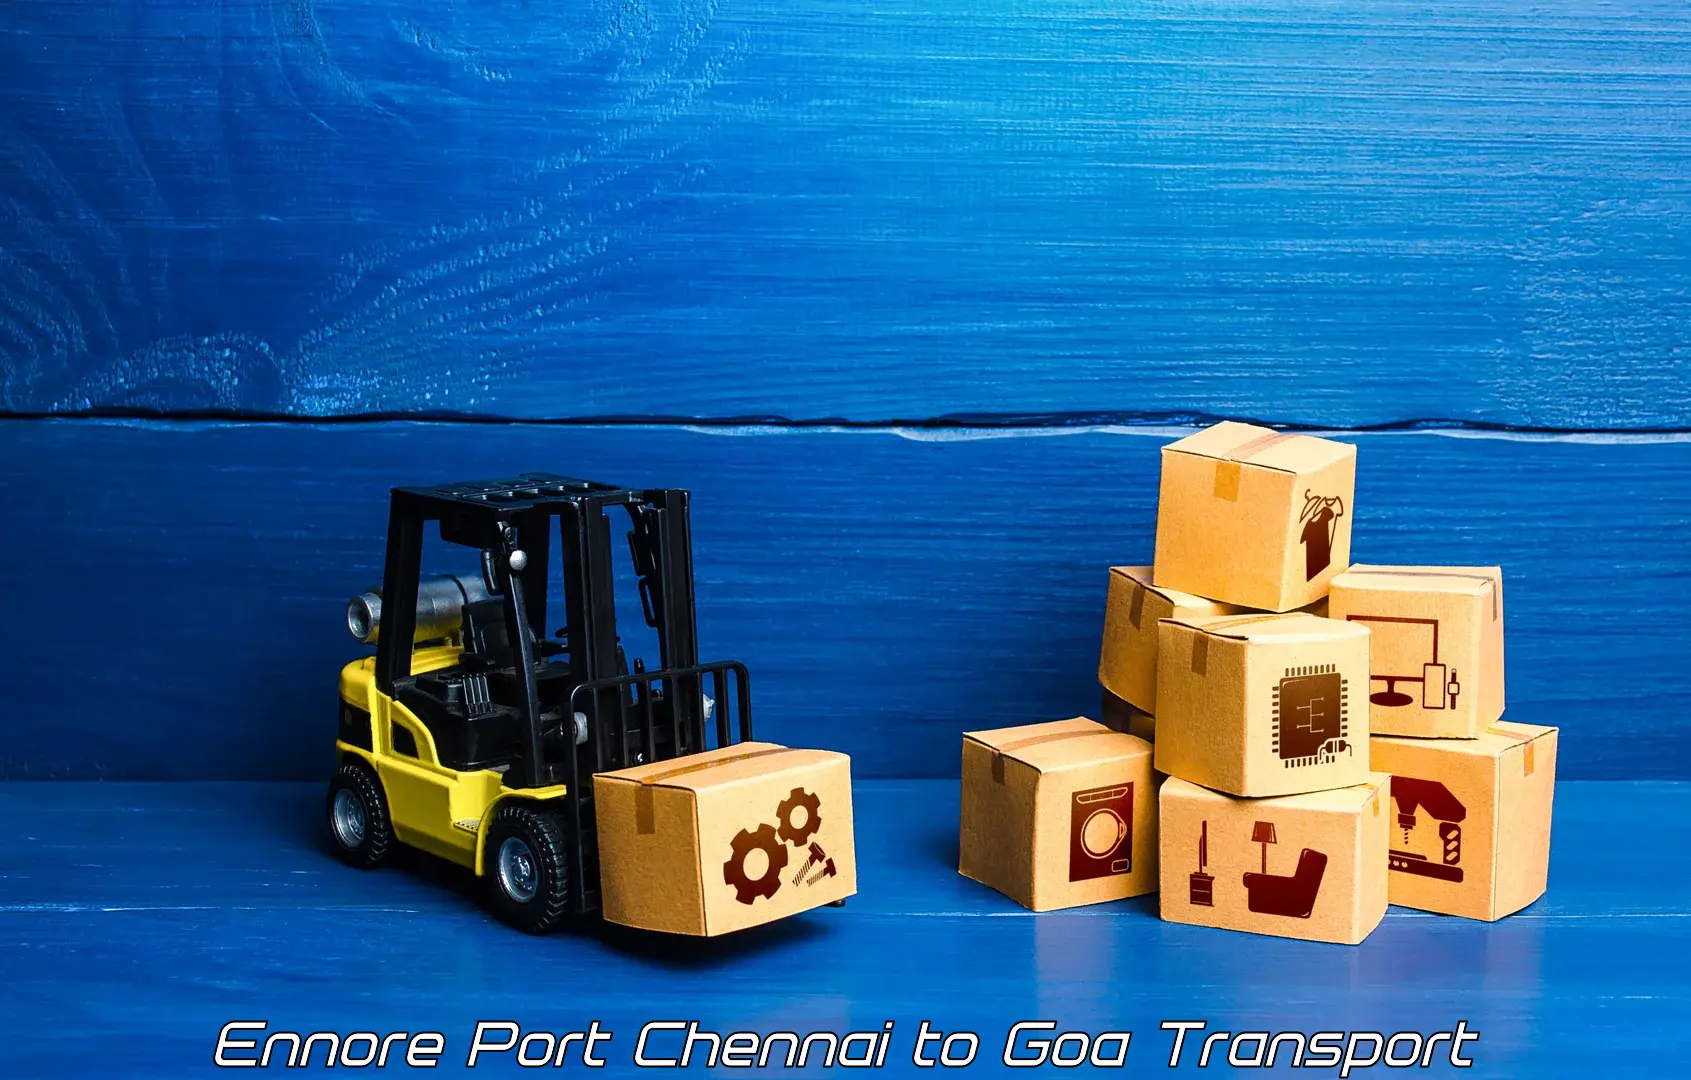 Transport shared services Ennore Port Chennai to Goa